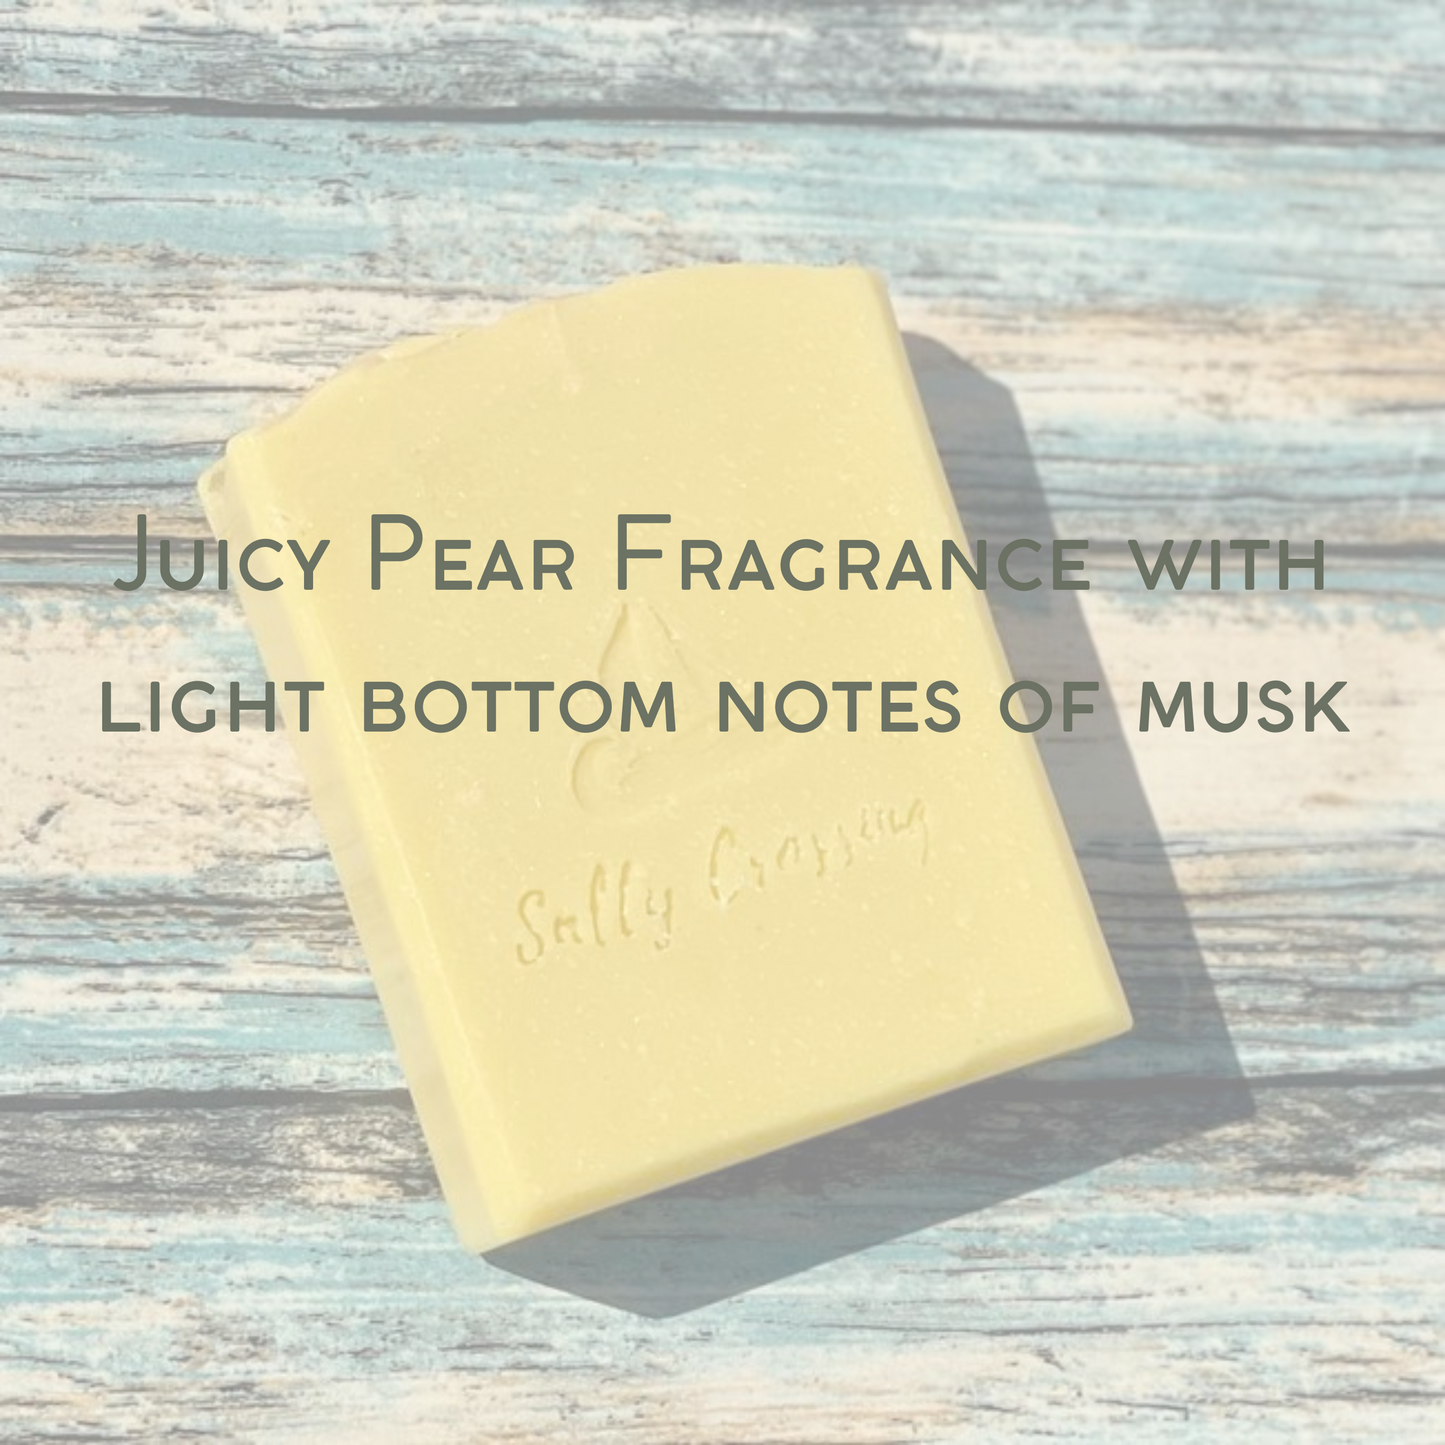 juicy pear fragrance with light bottom notes of musk. graphic.